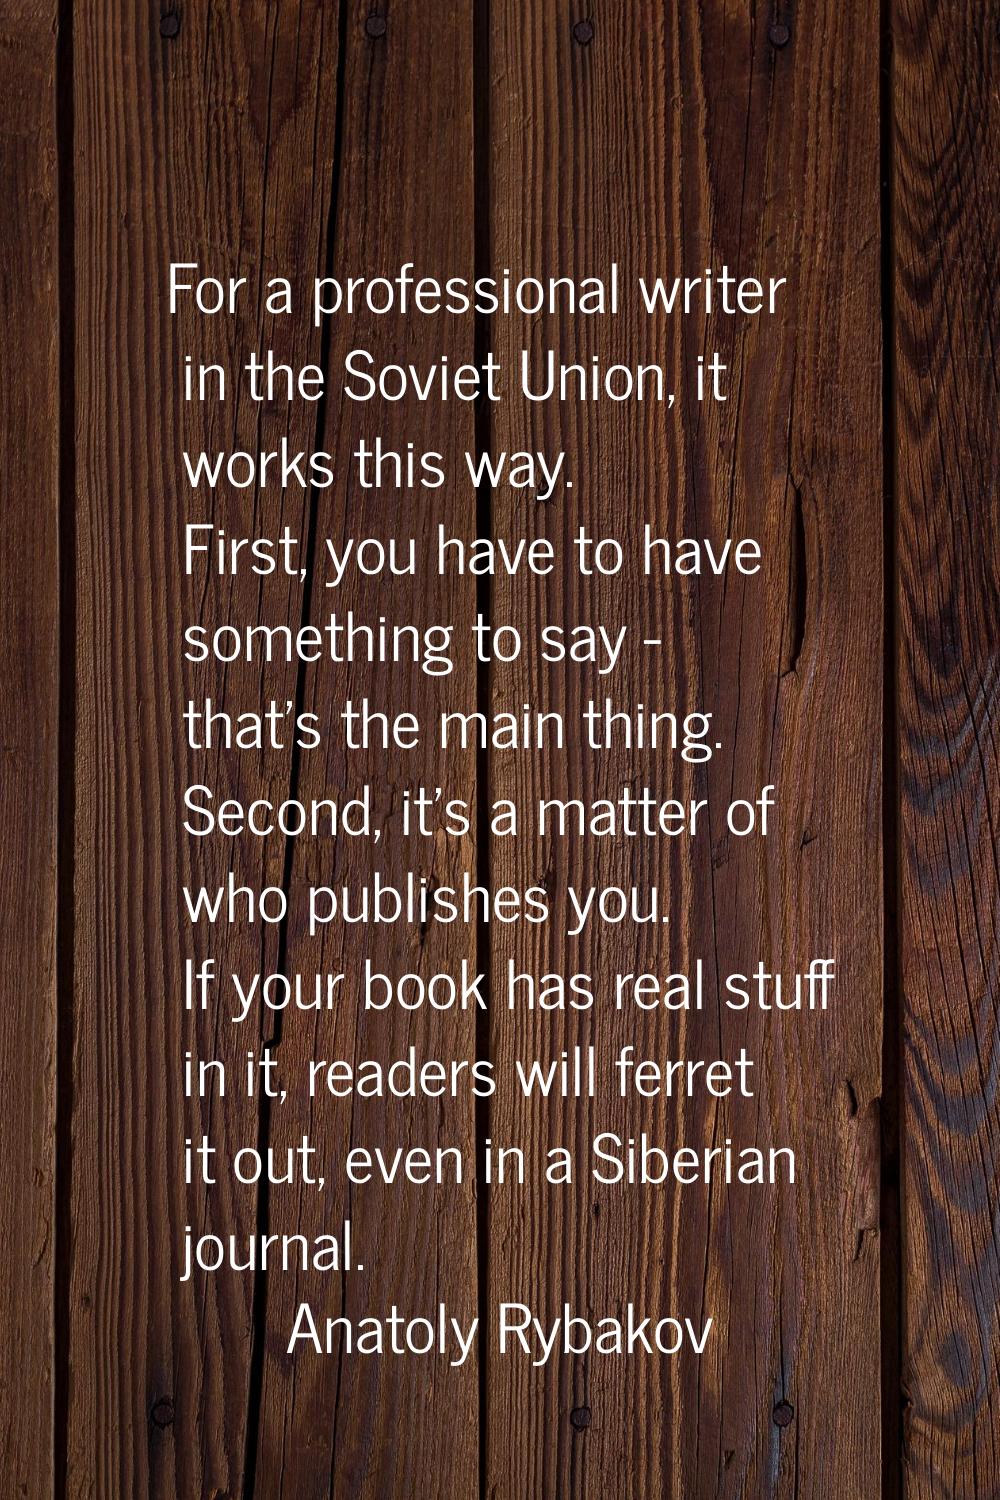 For a professional writer in the Soviet Union, it works this way. First, you have to have something